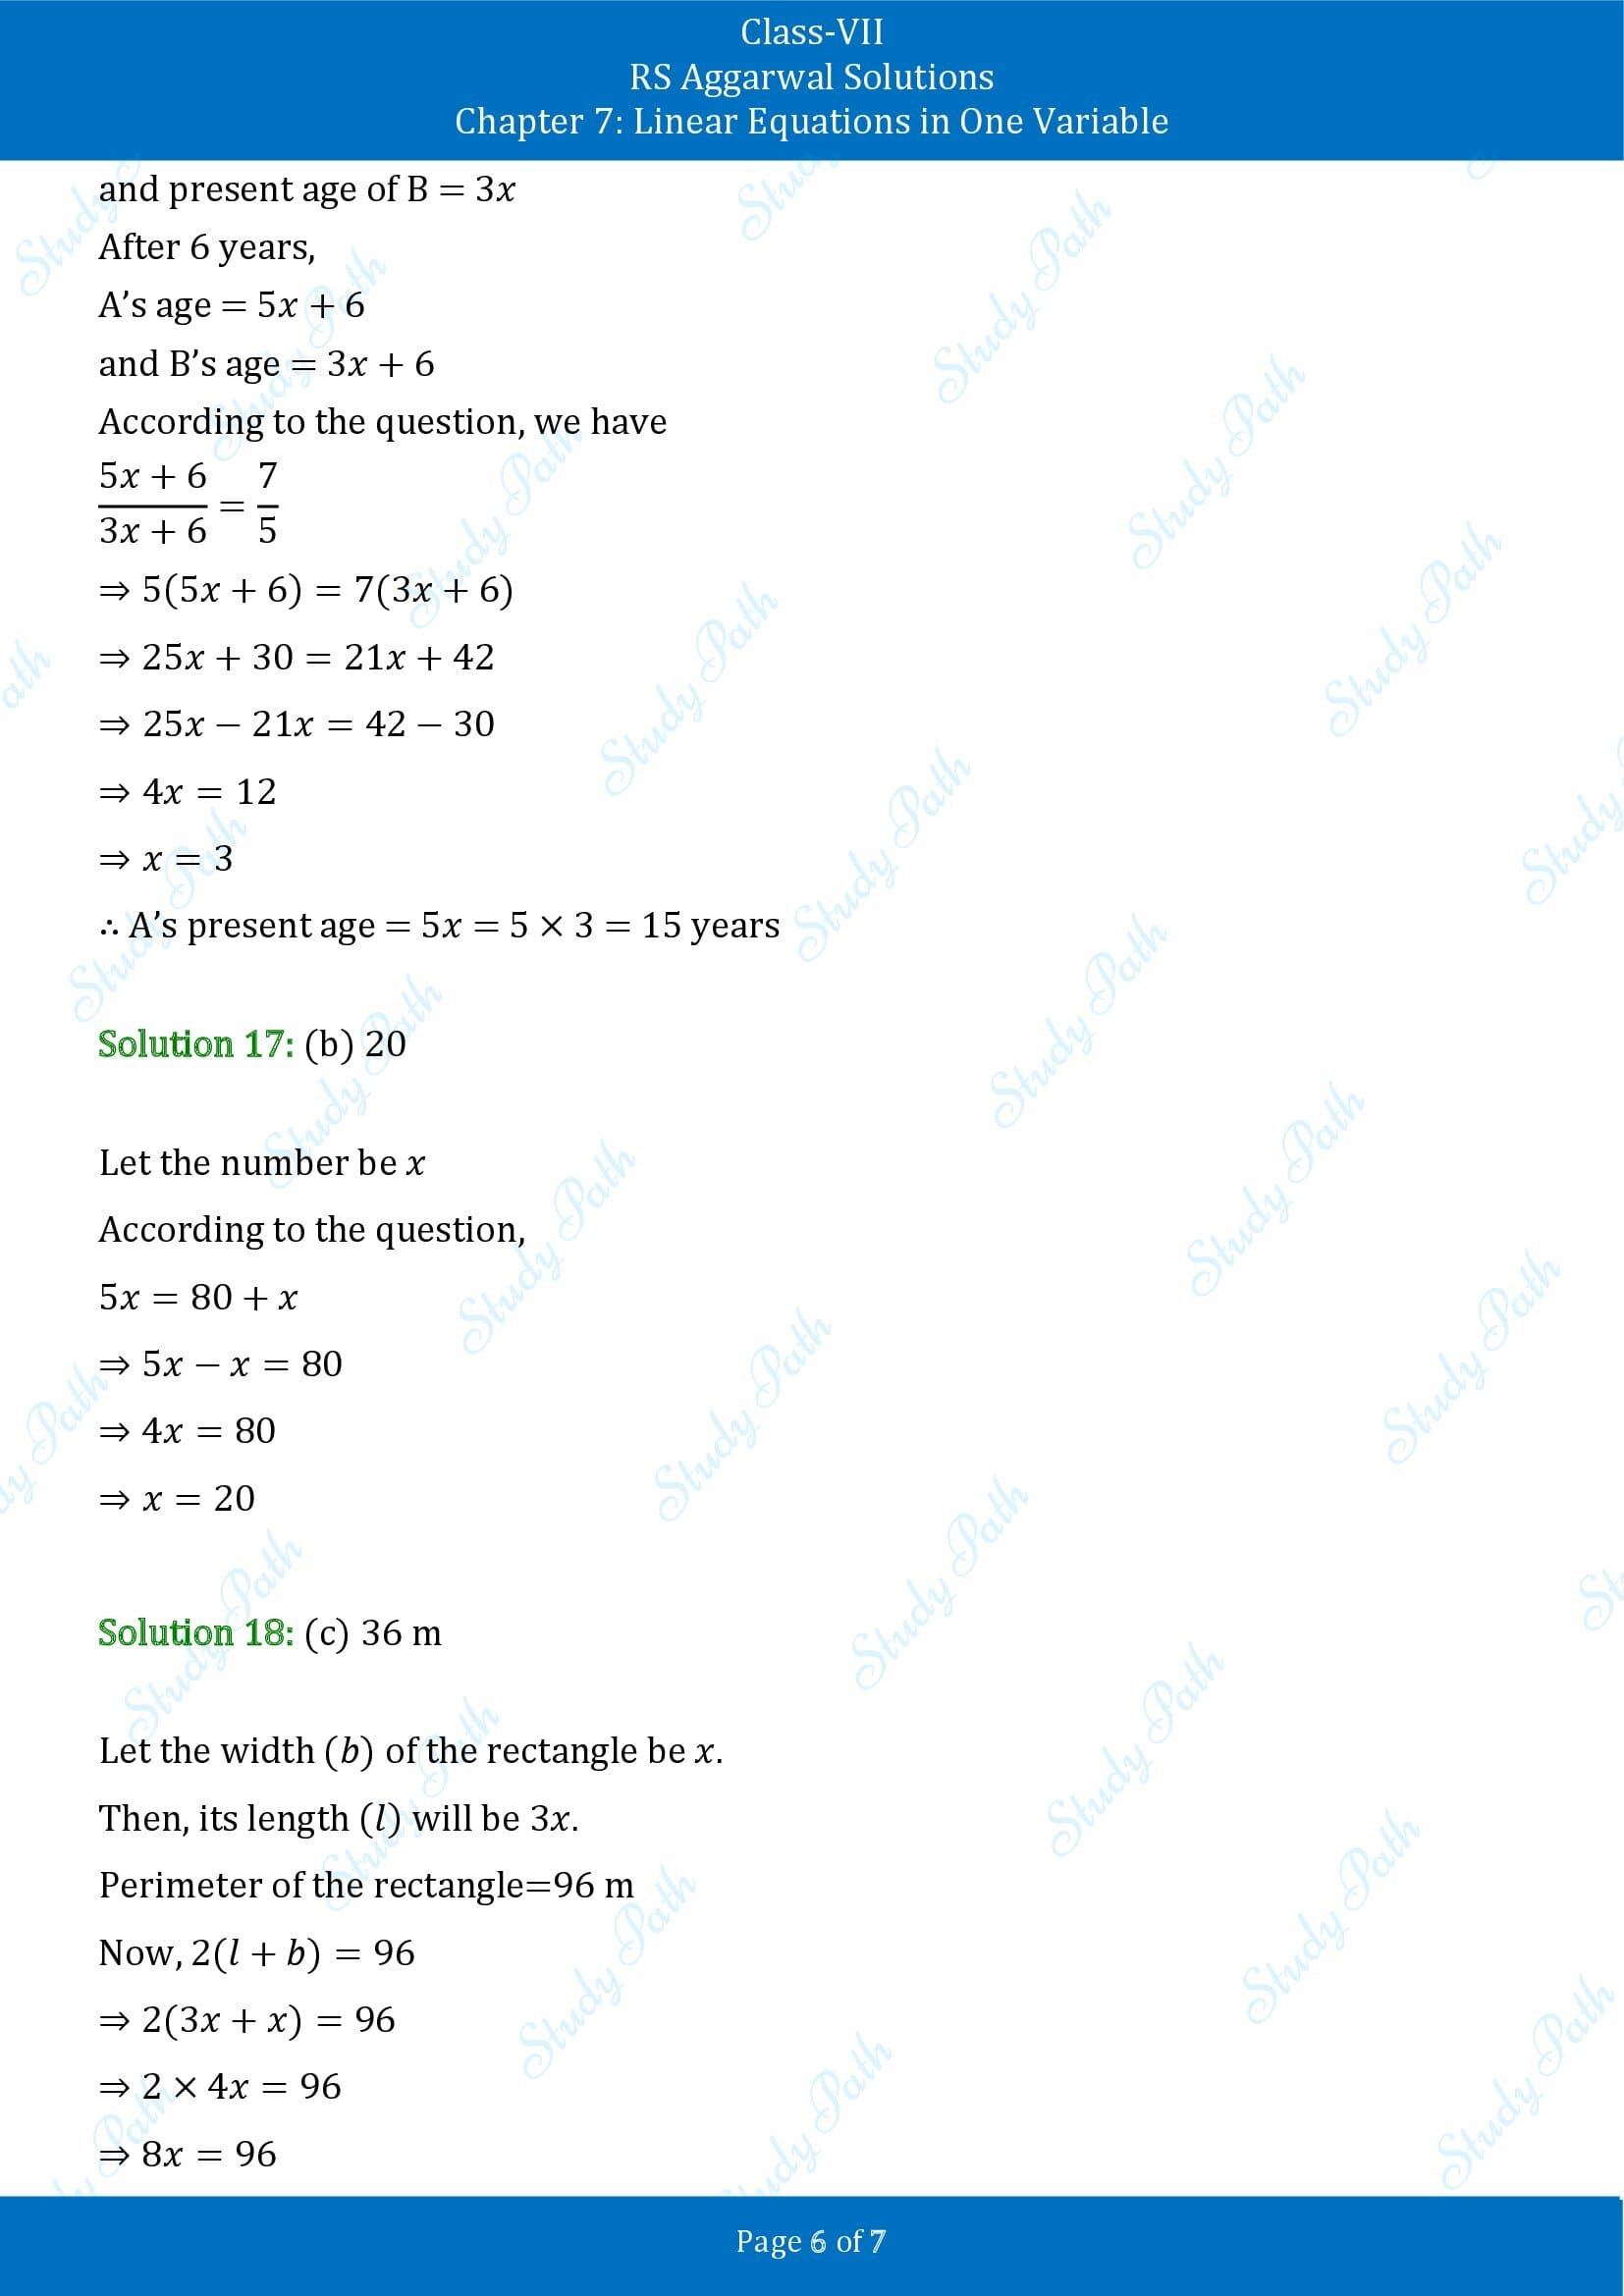 RS Aggarwal Solutions Class 7 Chapter 7 Linear Equations in One Variable Exercise 7C MCQs 00006